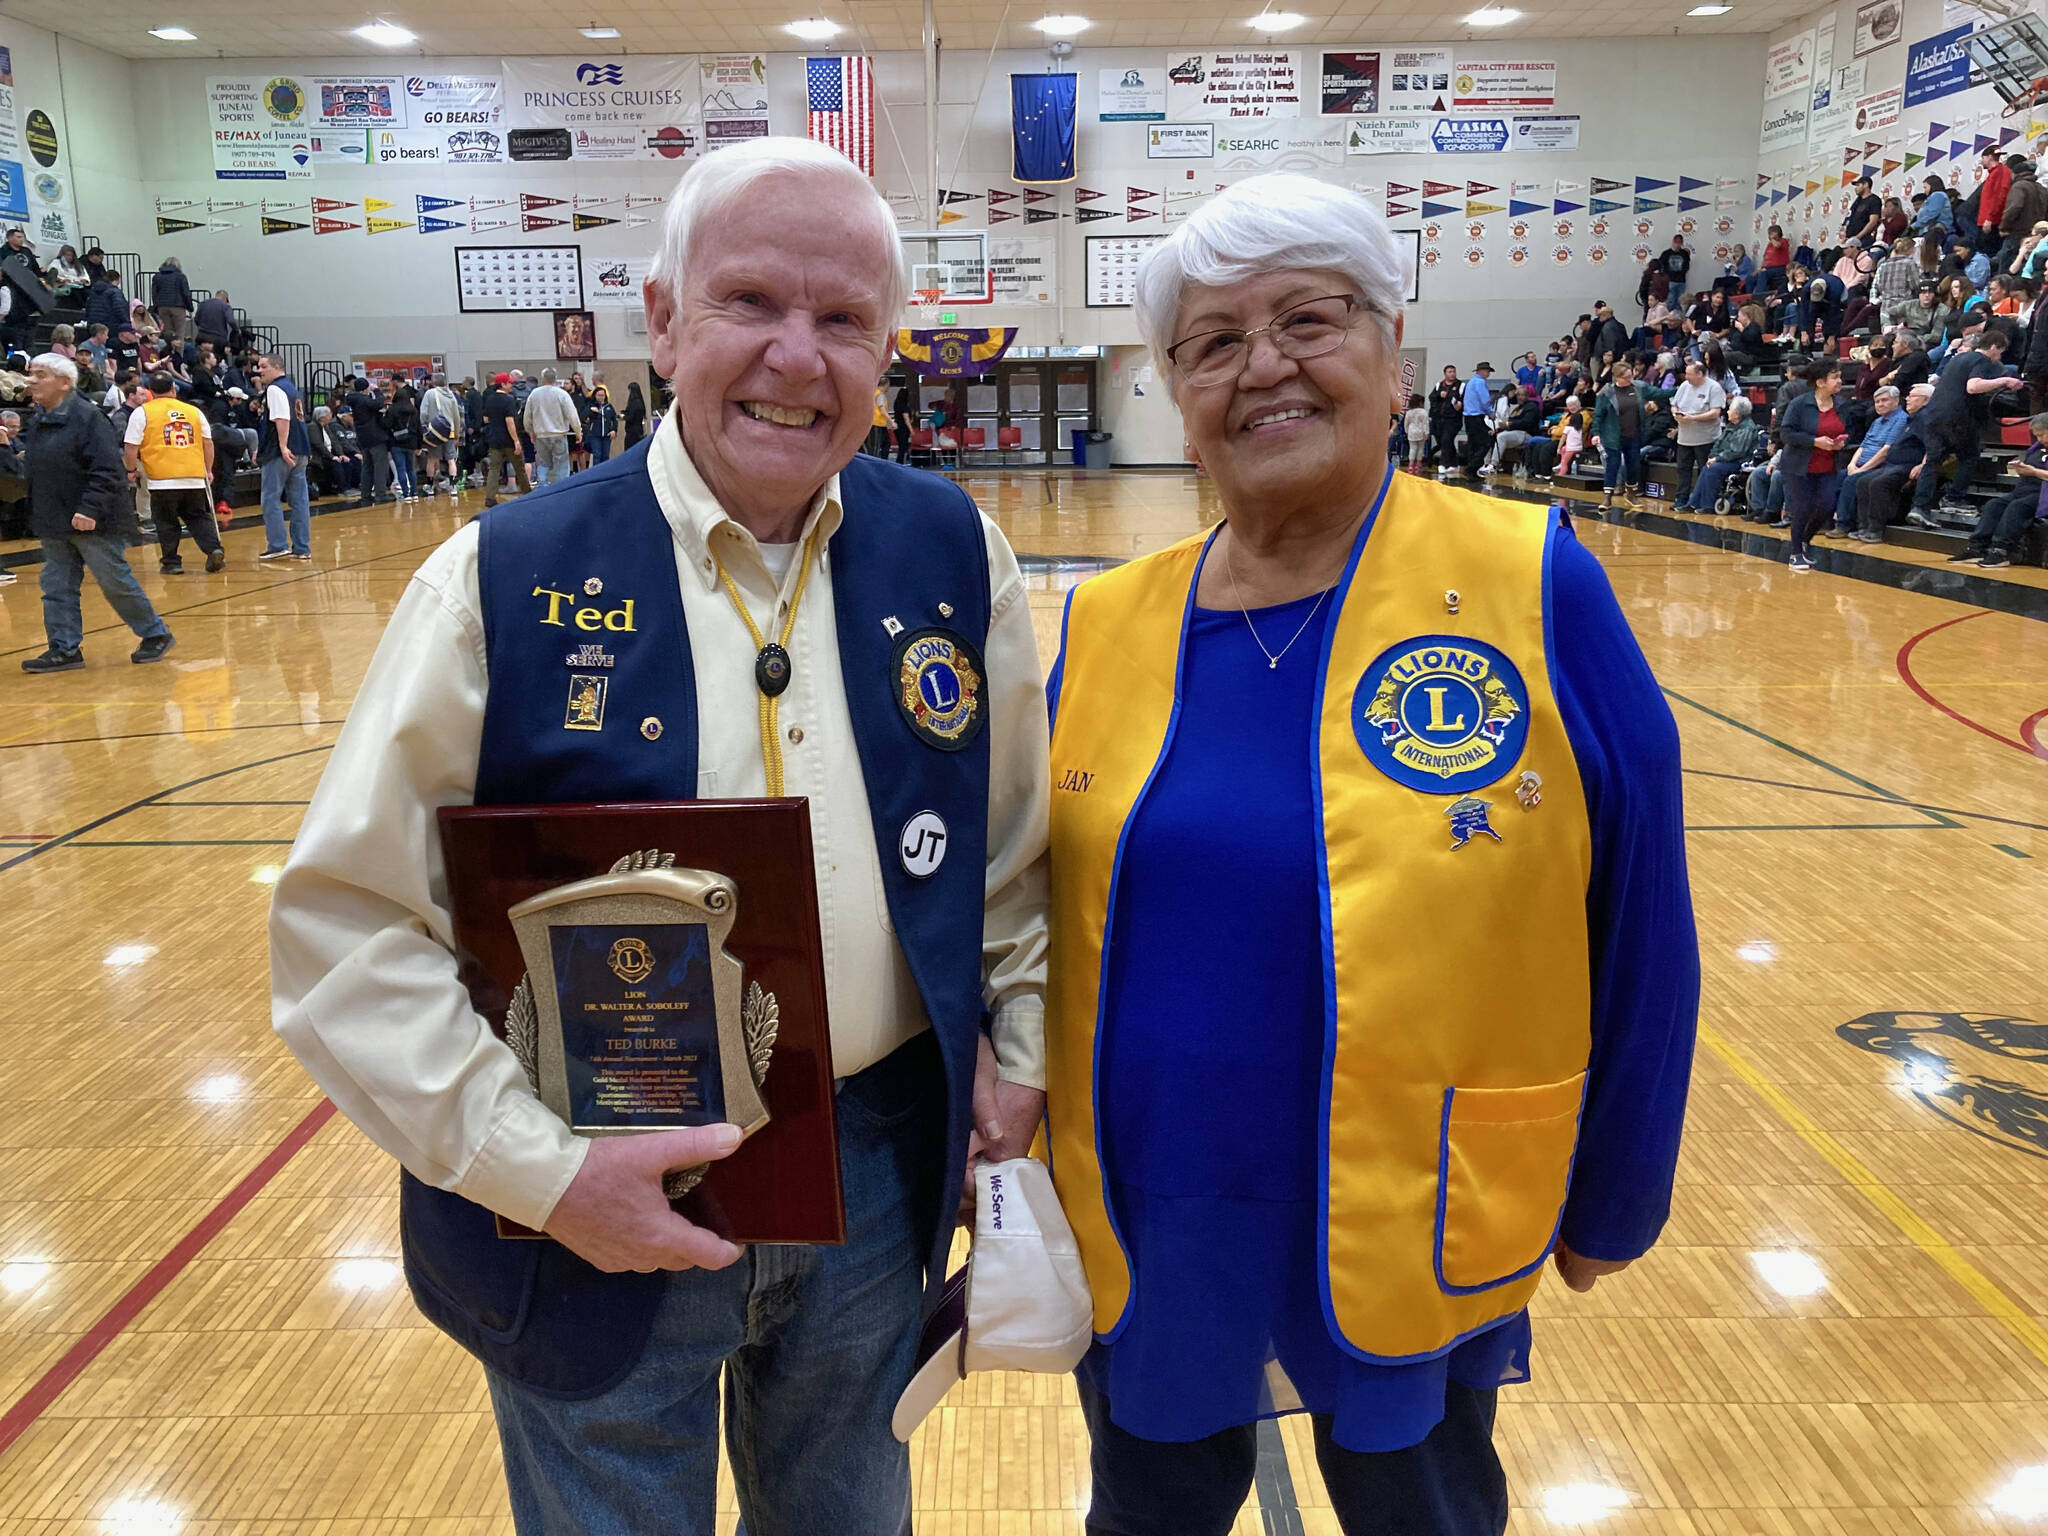 Ted Burke and wife Jan pose for a photo at the Gold Medal Basketball Tournament on Saturday. Burke was the recipient of the Dr. Walter Soboleff Award. (Klas Stolpe/For the Juneau Empire)